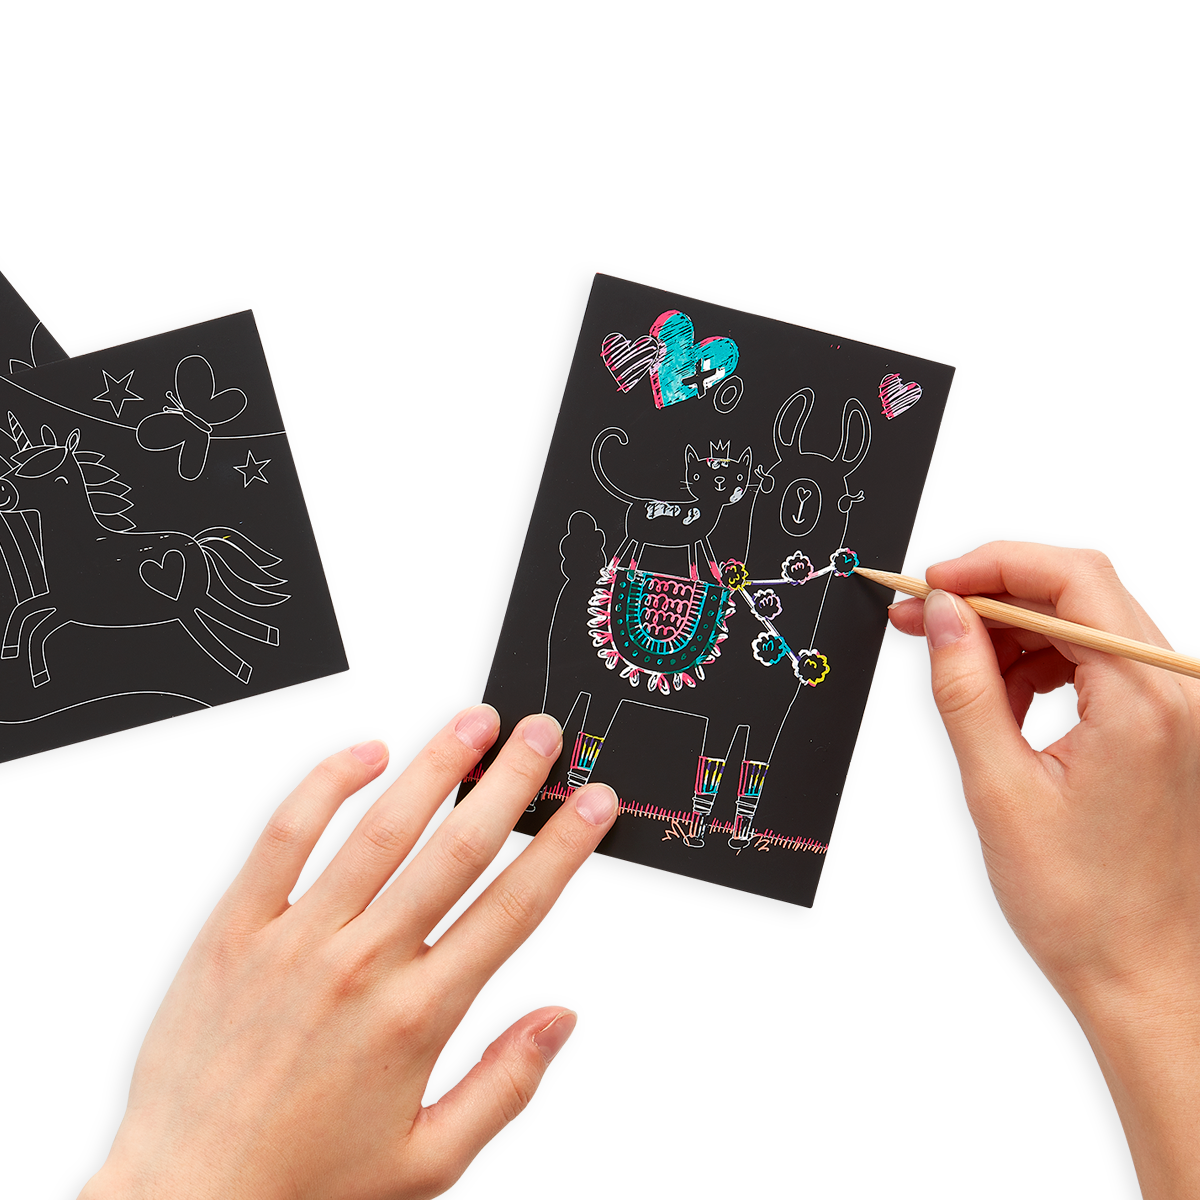 Hands drawing on the Funtastic Friends Scratch and Scribble Mini Scratch Art Kit